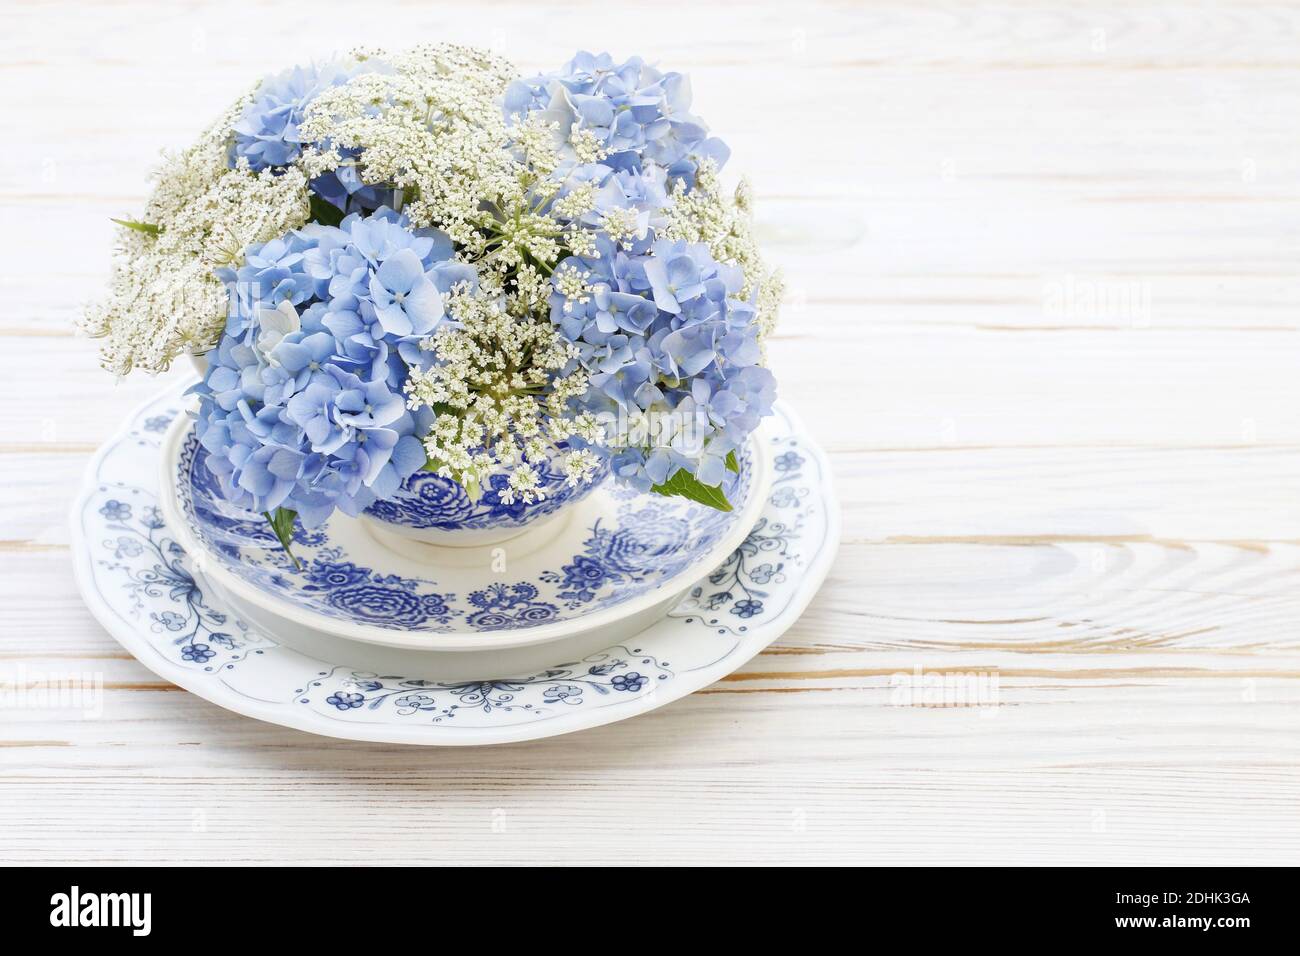 Floral arrangement with blue hortensia (hydrangea) and white Queen Anne's lace (daucus carota) flowers on white wooden table, copy space. Stock Photo